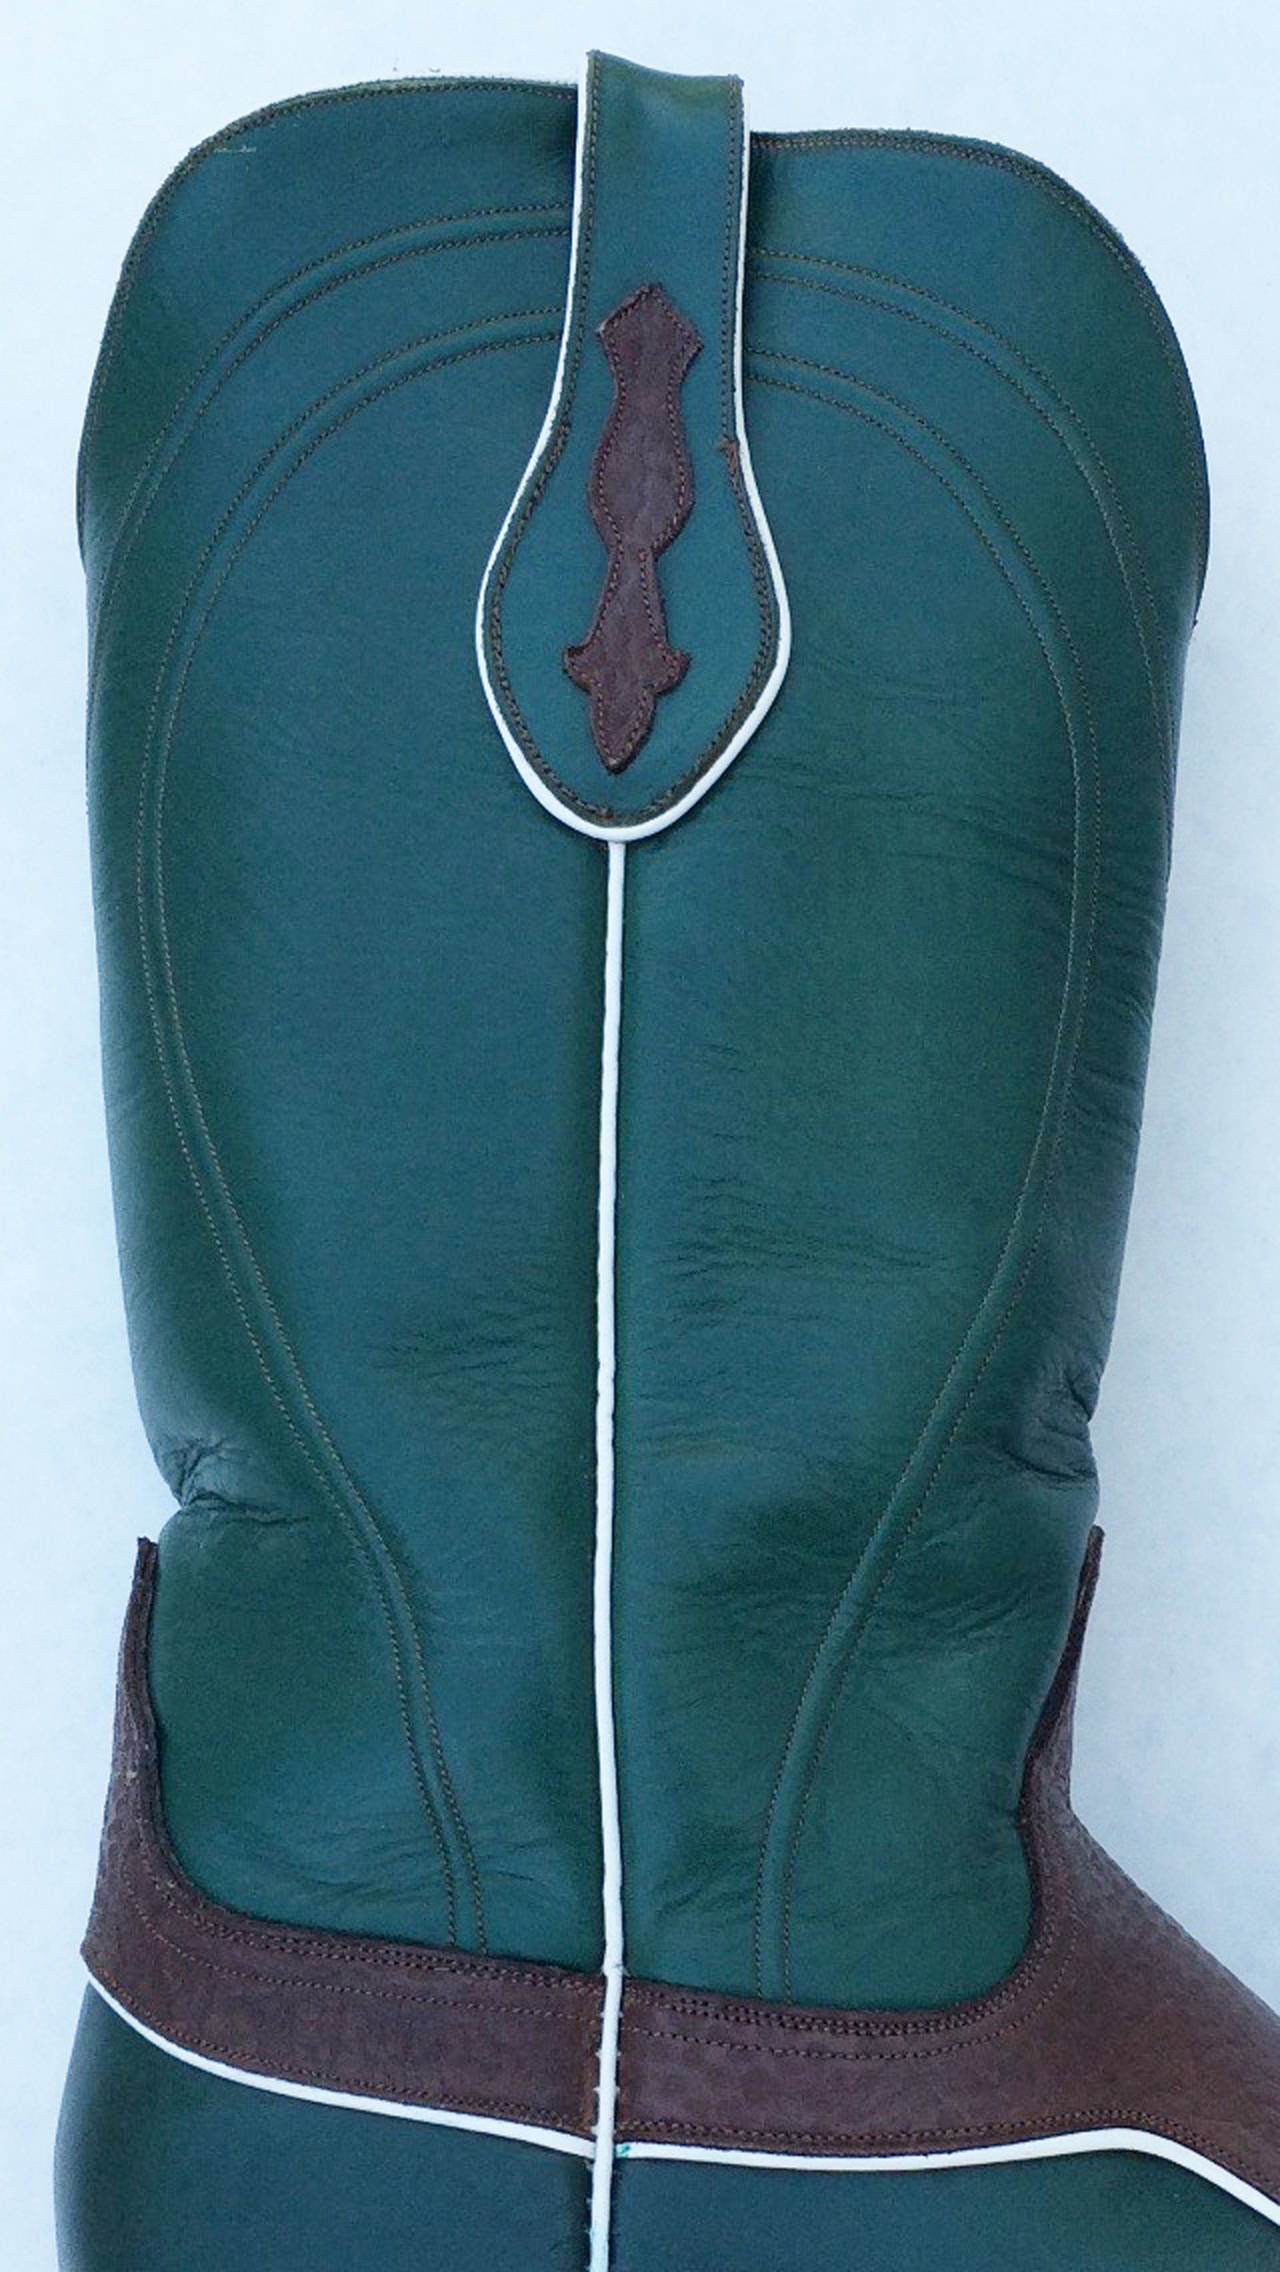 A fine vintage pair gents Ammons custom leather and kangaroo cowboy boots. Exquisite hand cut and pieced leather items including lining, soles and heels. Rich supple dark green with brown kandaroo and white leather trimmed items feature original